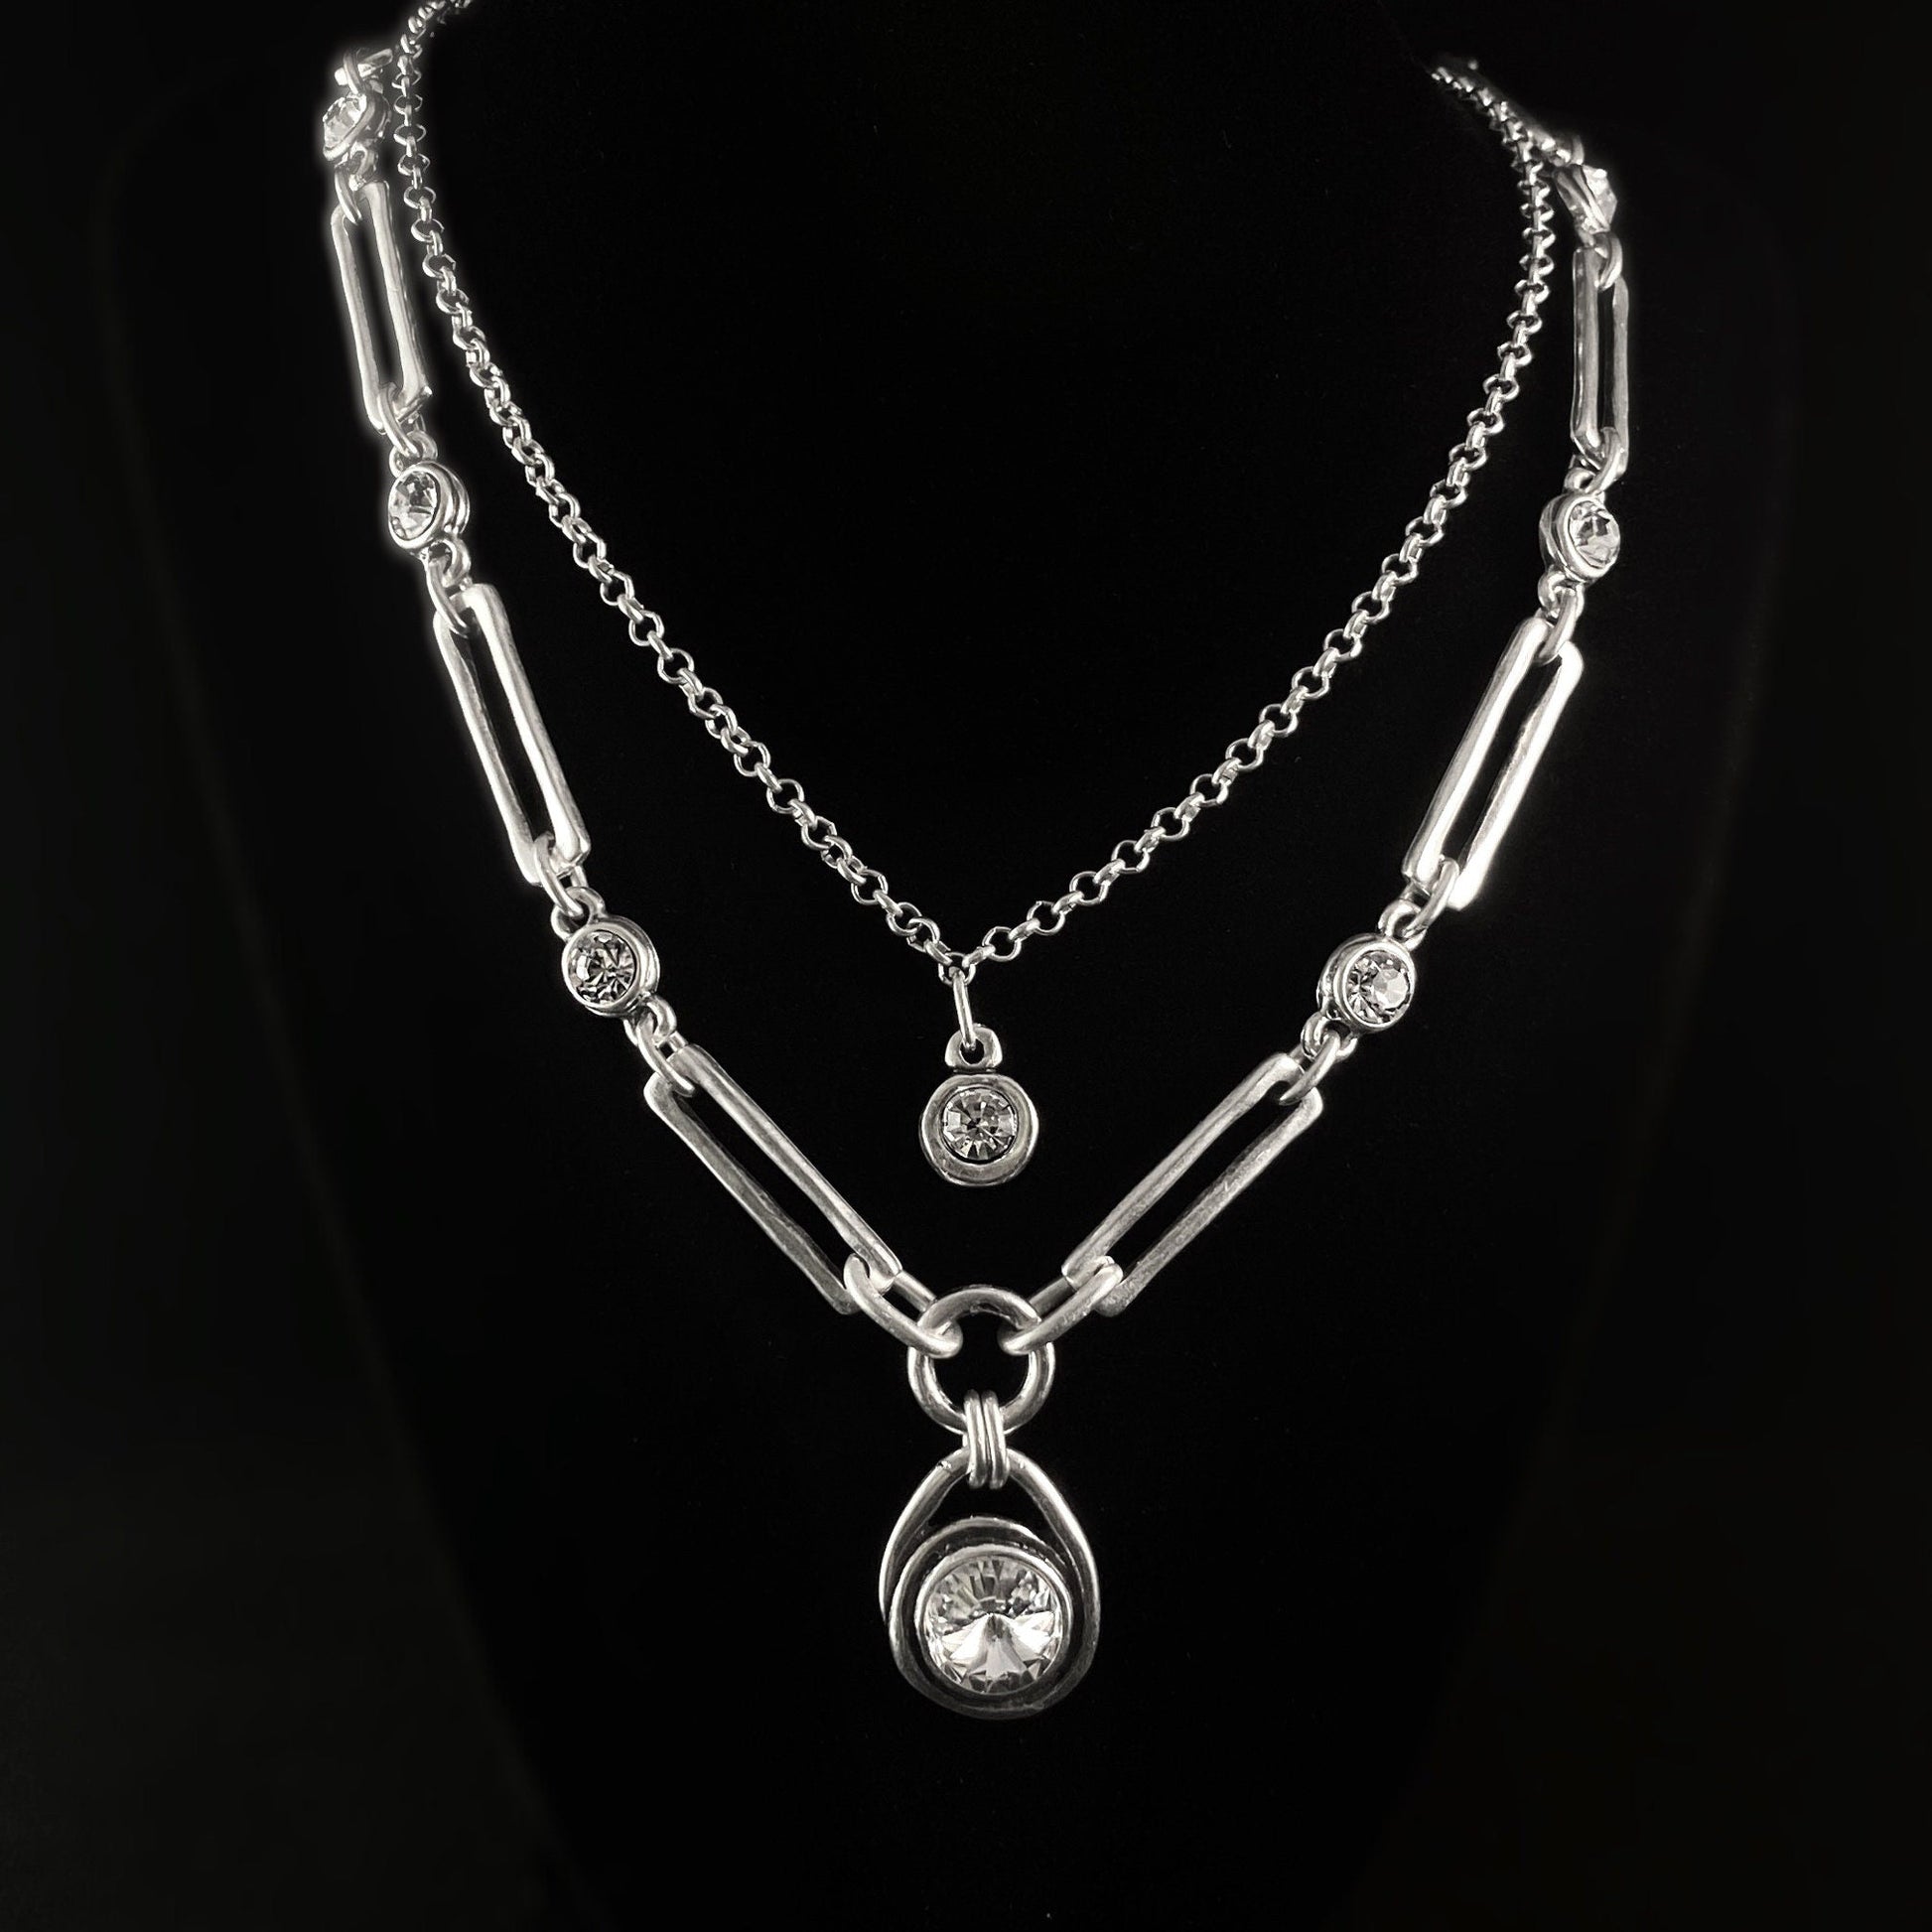 Silver Double Strand Necklace with Clear Crystals, Handmade, Nickel Free